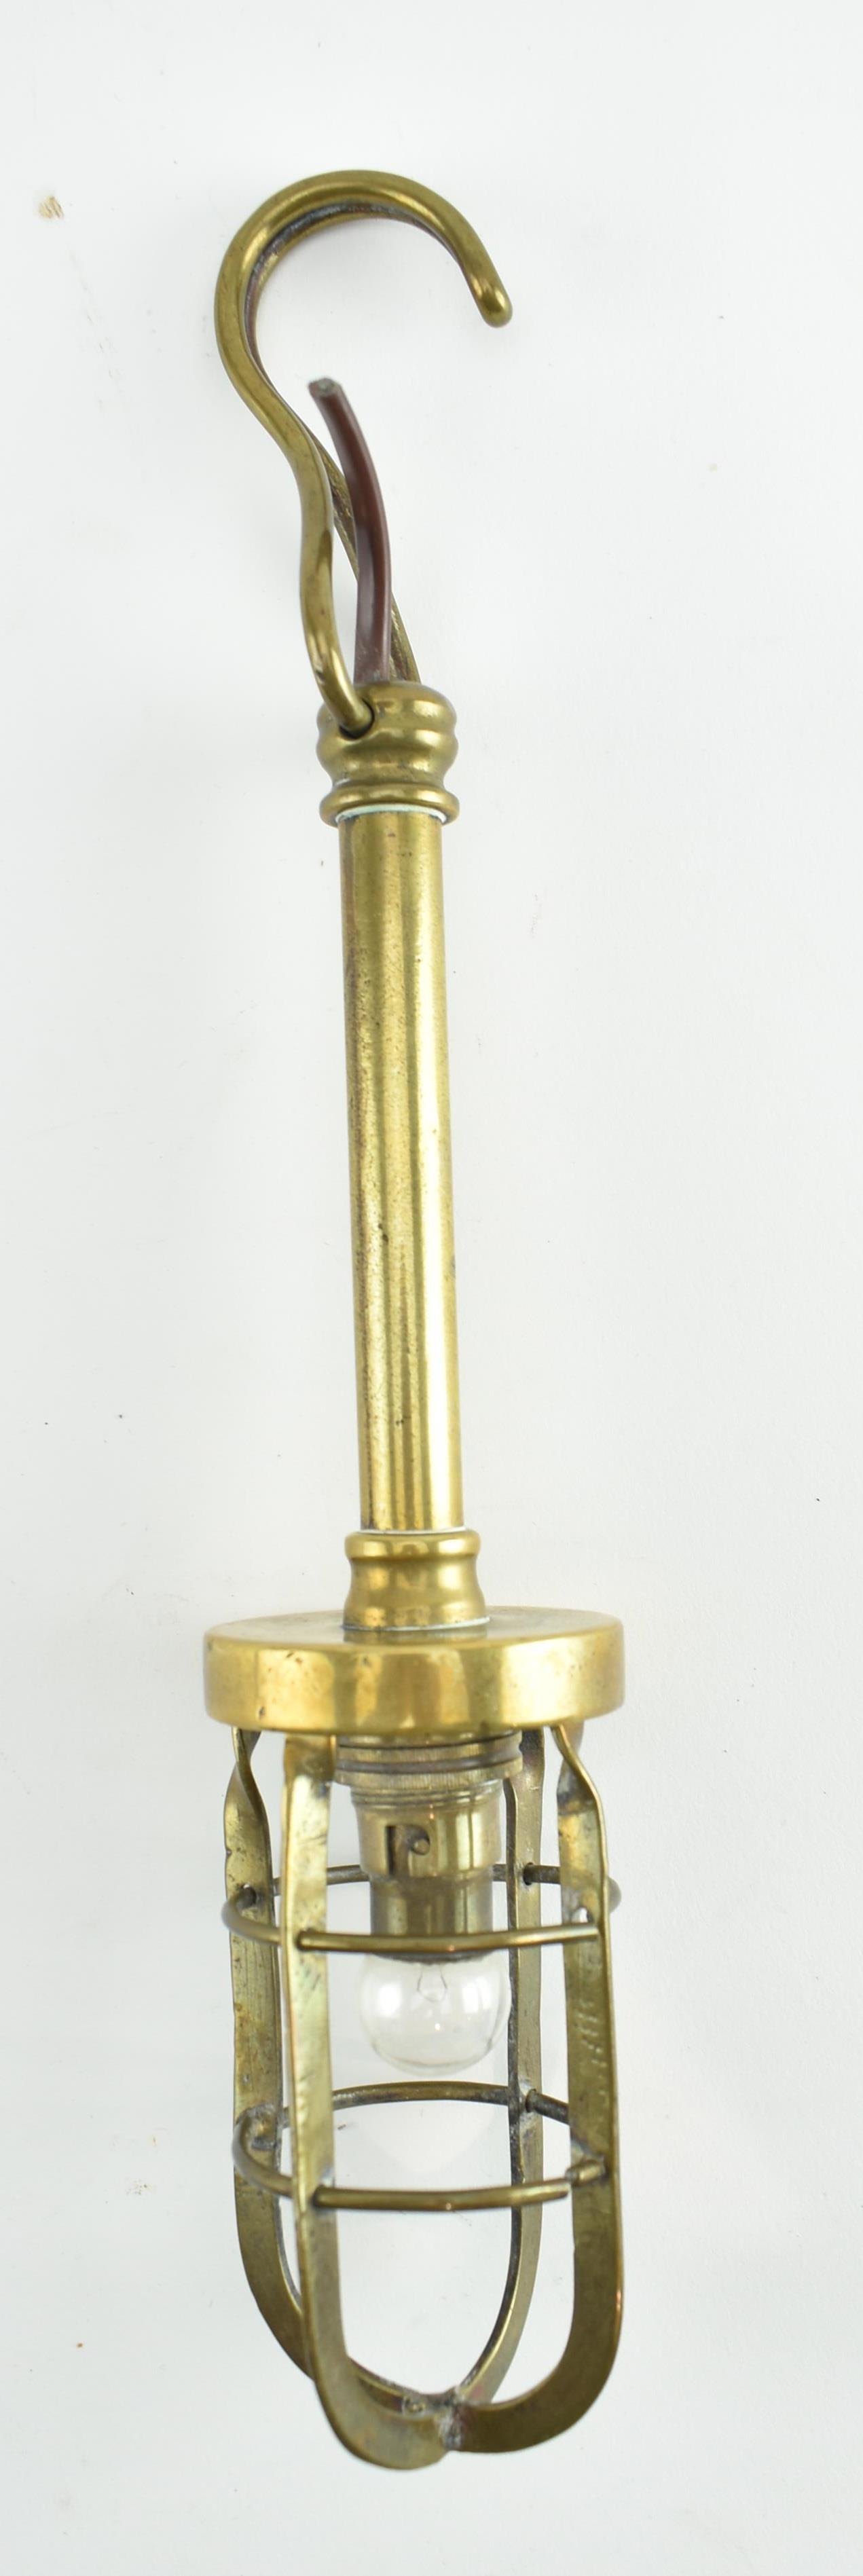 20TH CENTURY BRASS HANGING INSPECTION NAUTICAL DOCK LAMP - Image 2 of 5